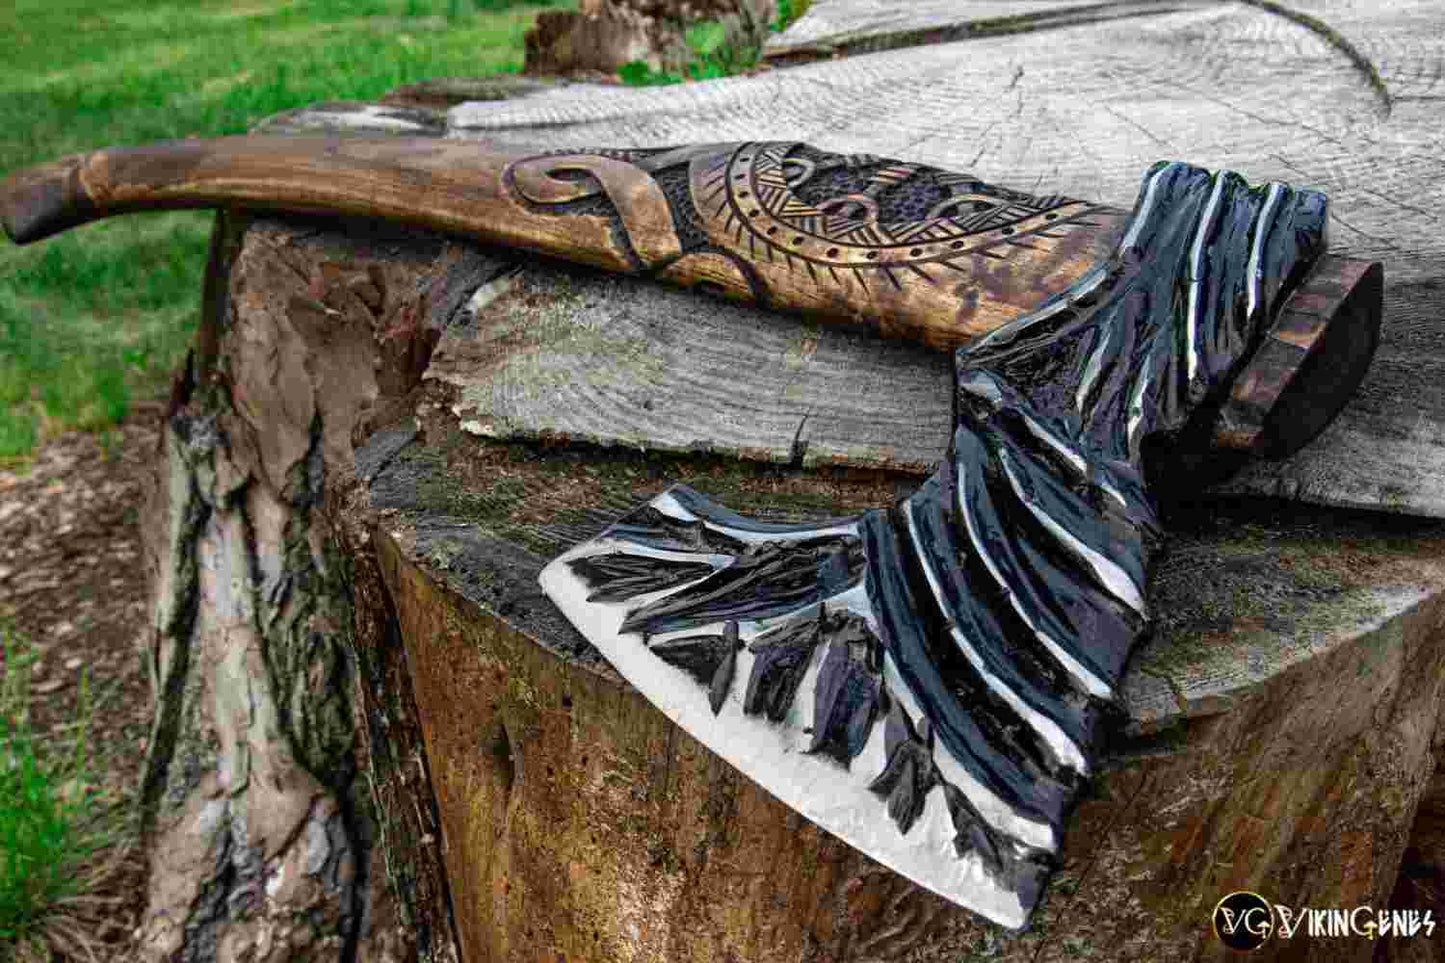 Forged steel axe with Agishyalm engraving